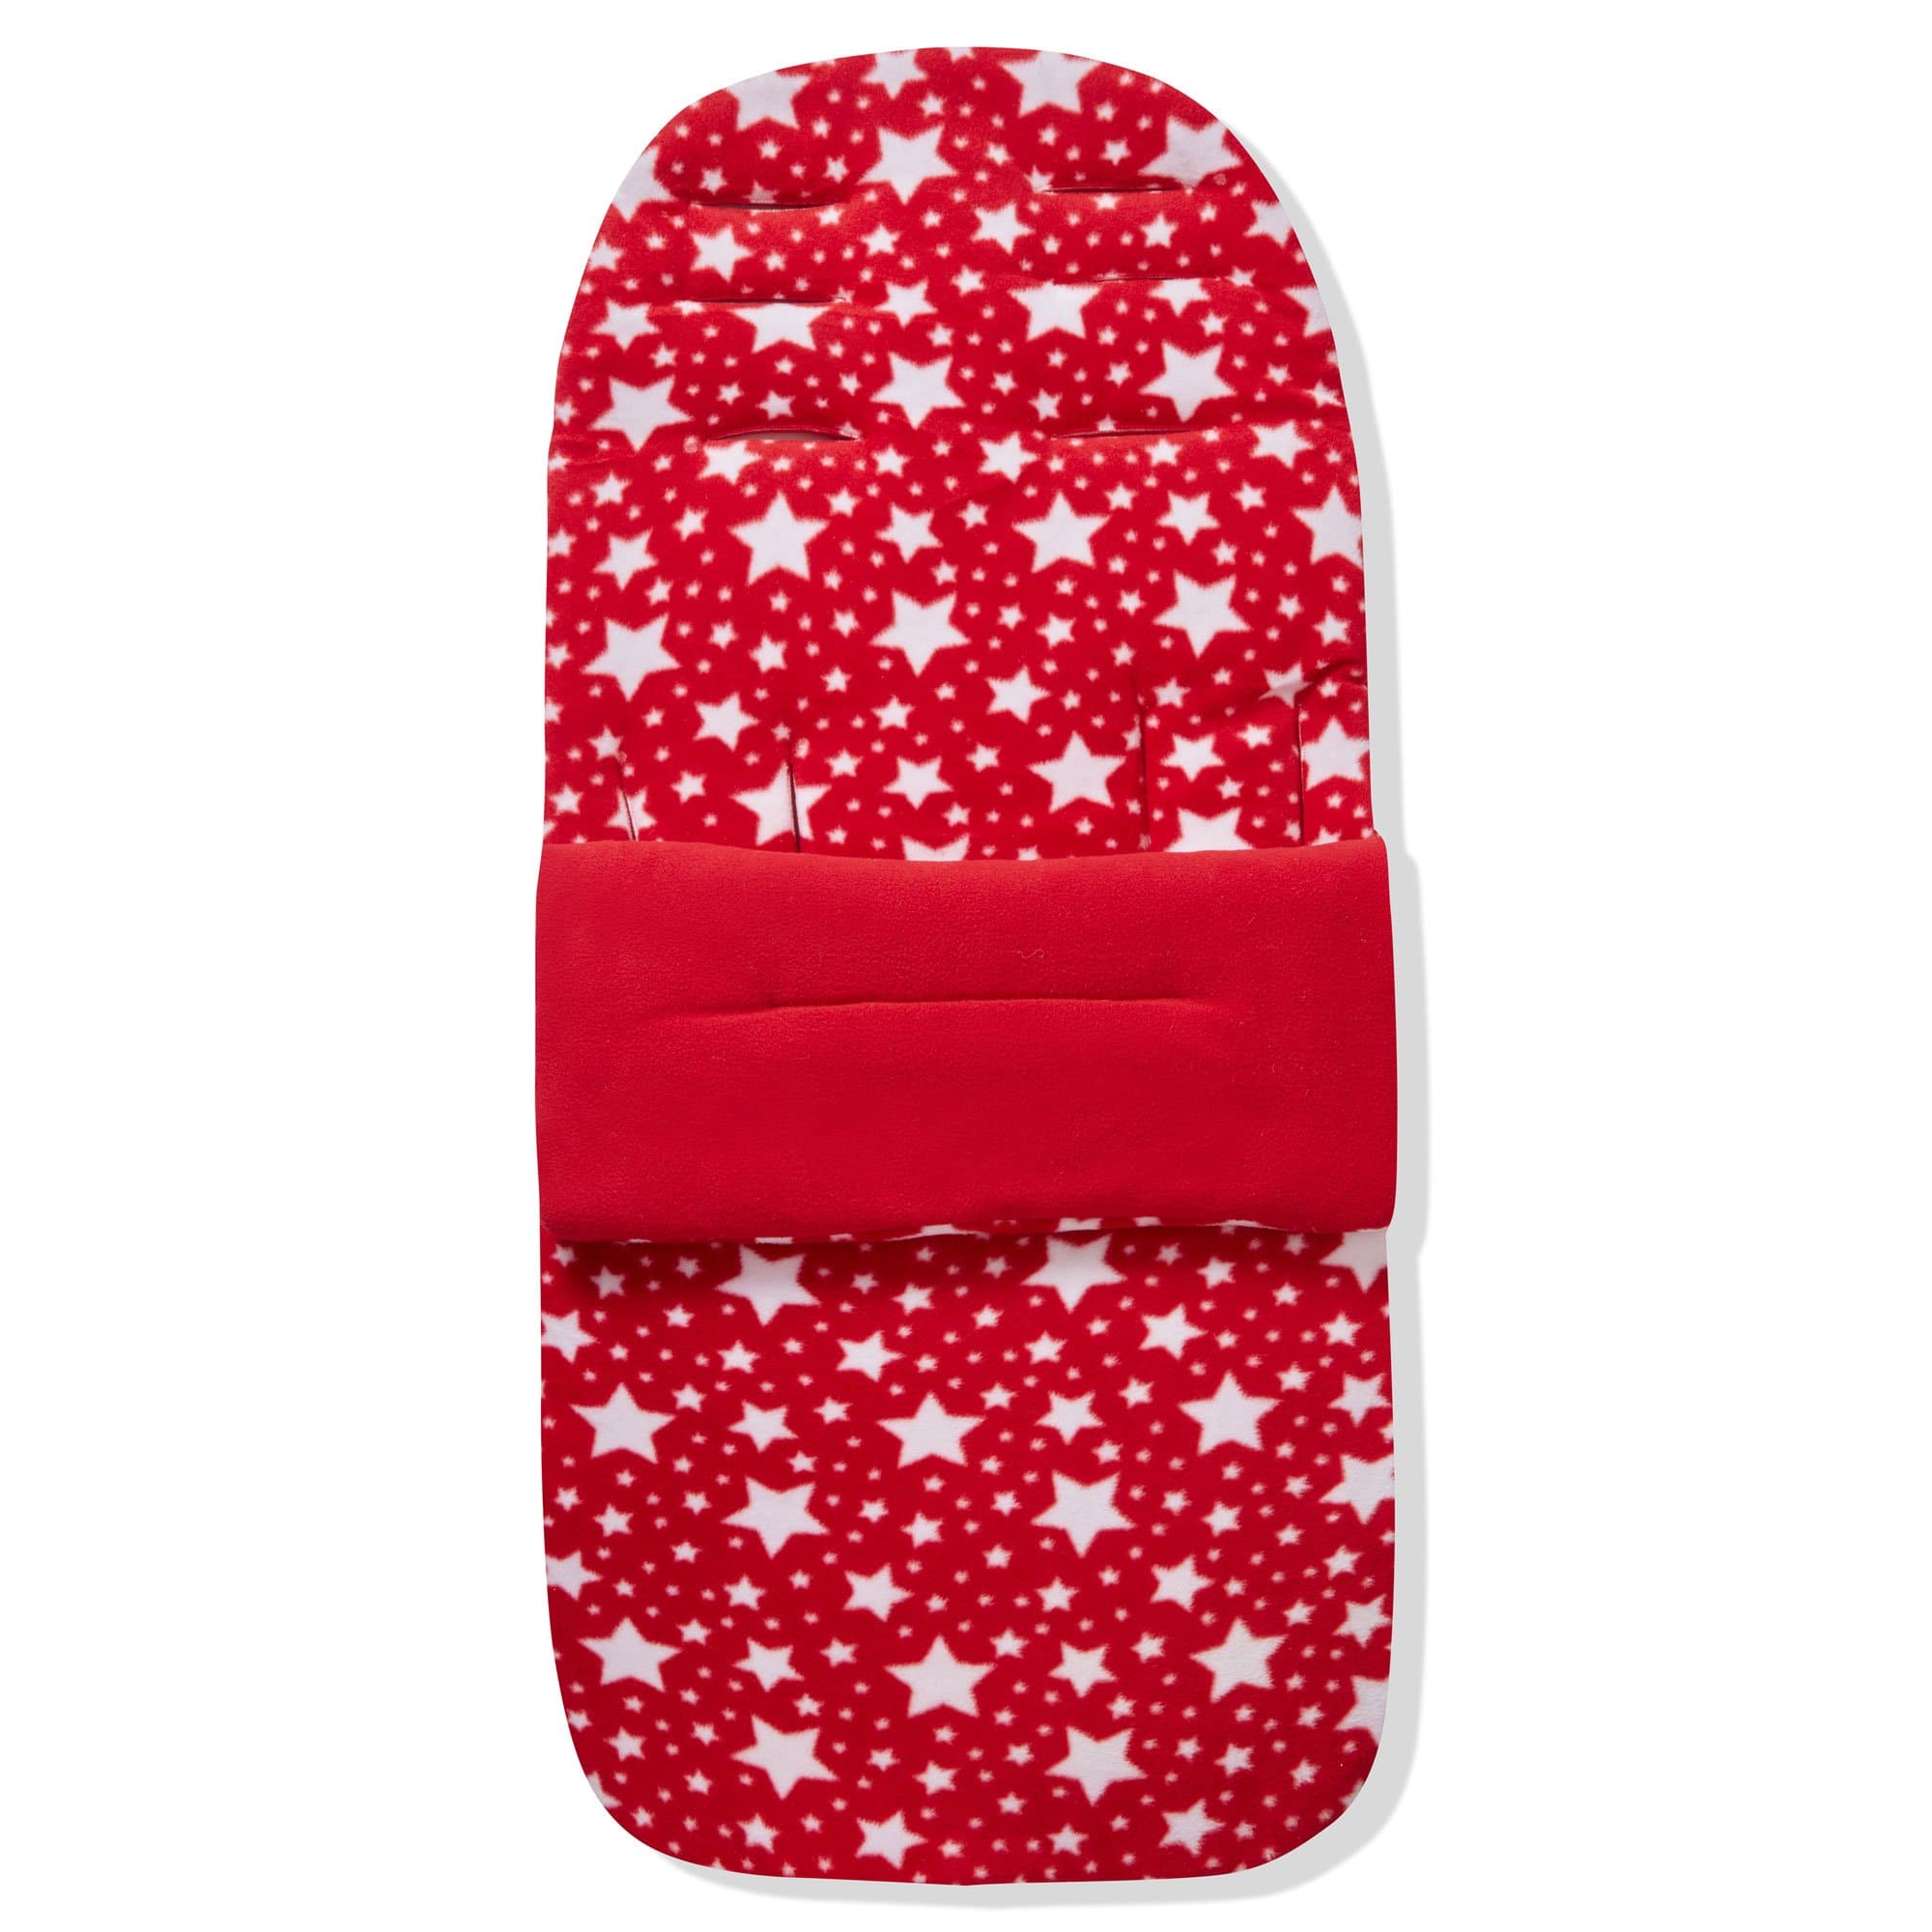 Fleece Footmuff / Cosy Toes Compatible with Kids Kargo - Red Star / Fits All Models | For Your Little One